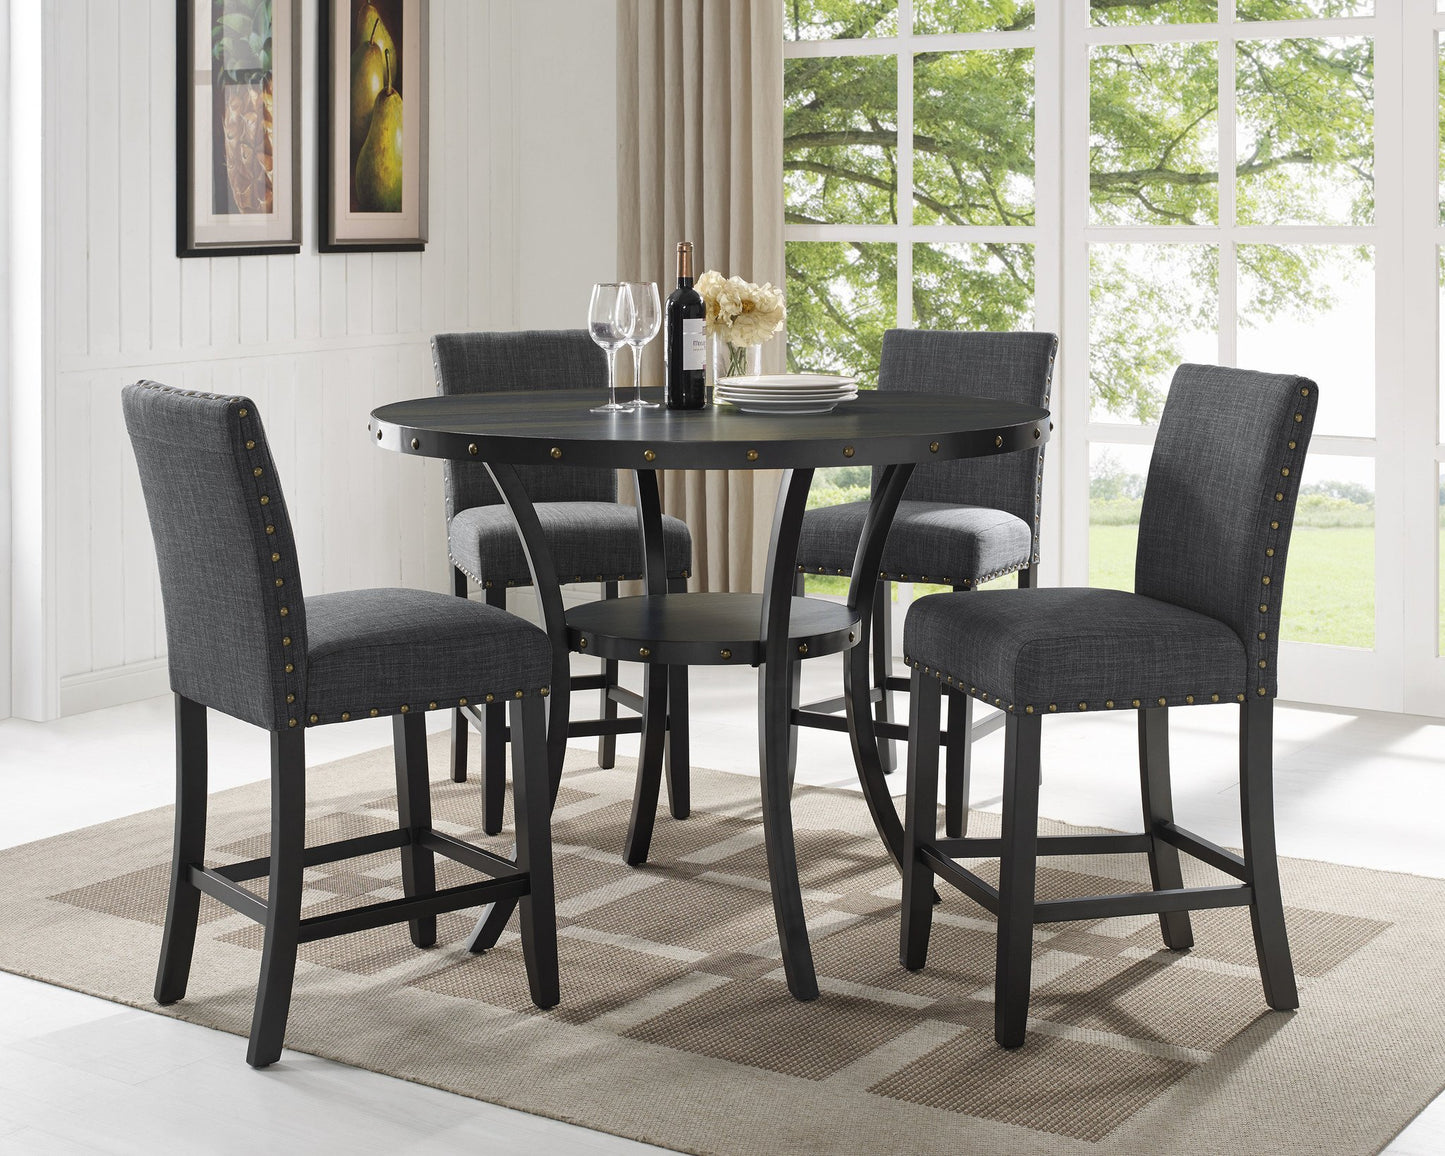 Biony Espresso Wood Counter Height Dining Set with Grey Fabric Nailhead Stools